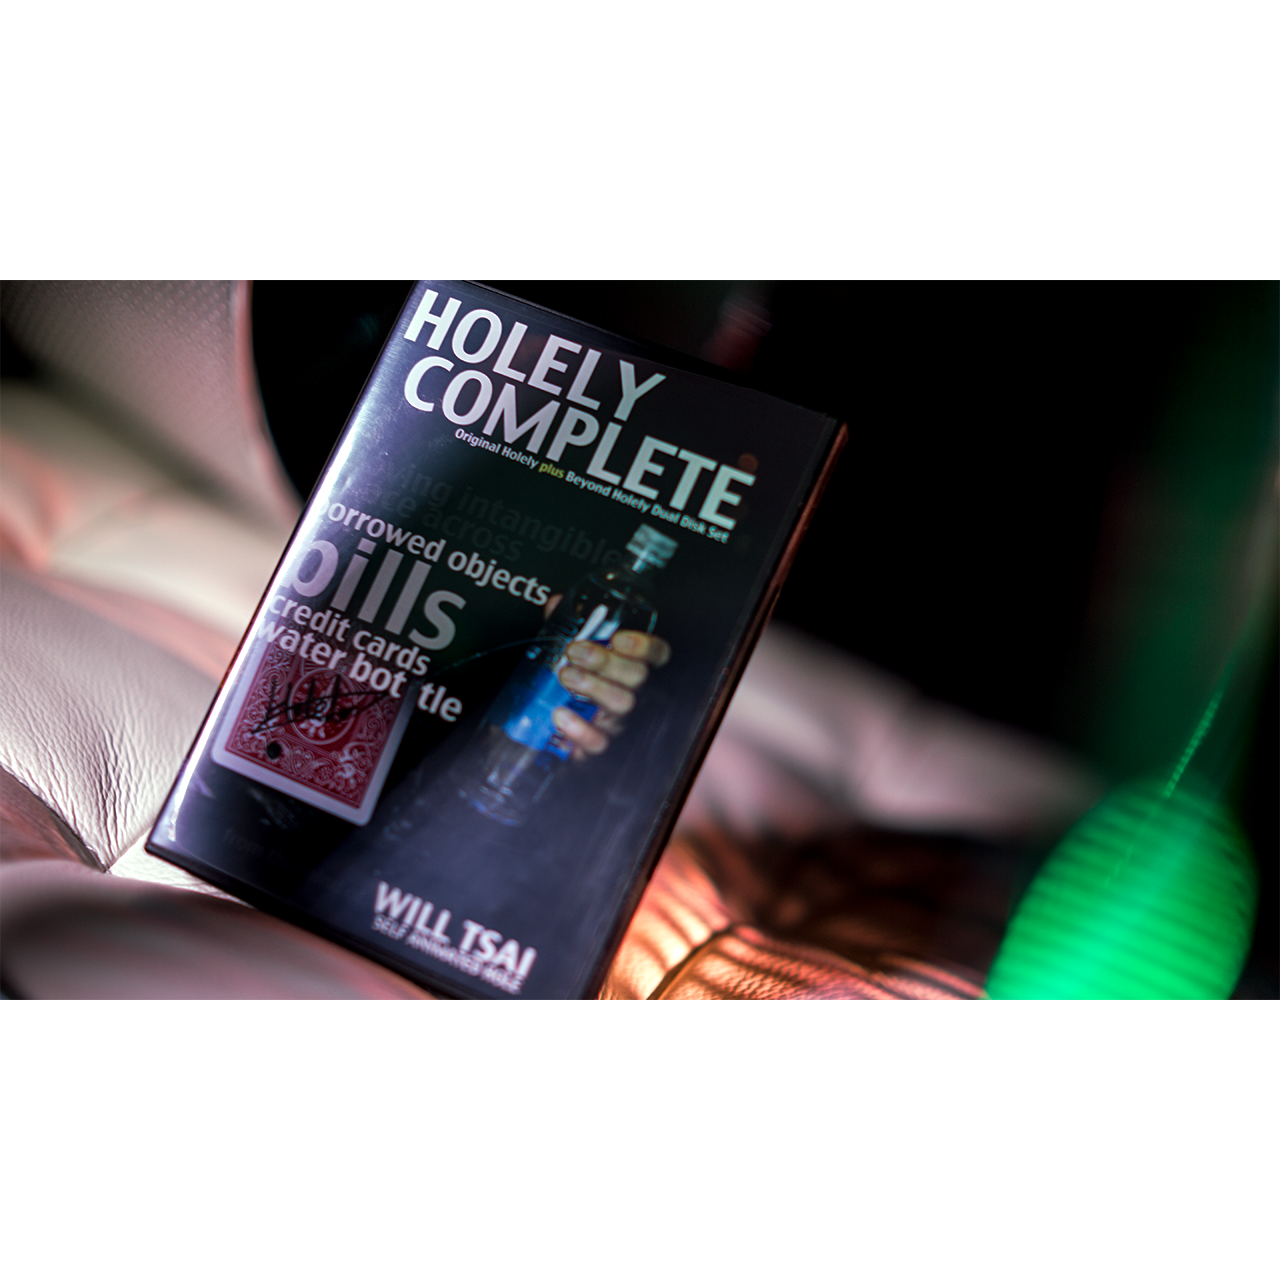 Holely Complete (Original + Beyond Holely) by Will Tsai and SansMinds Tricks